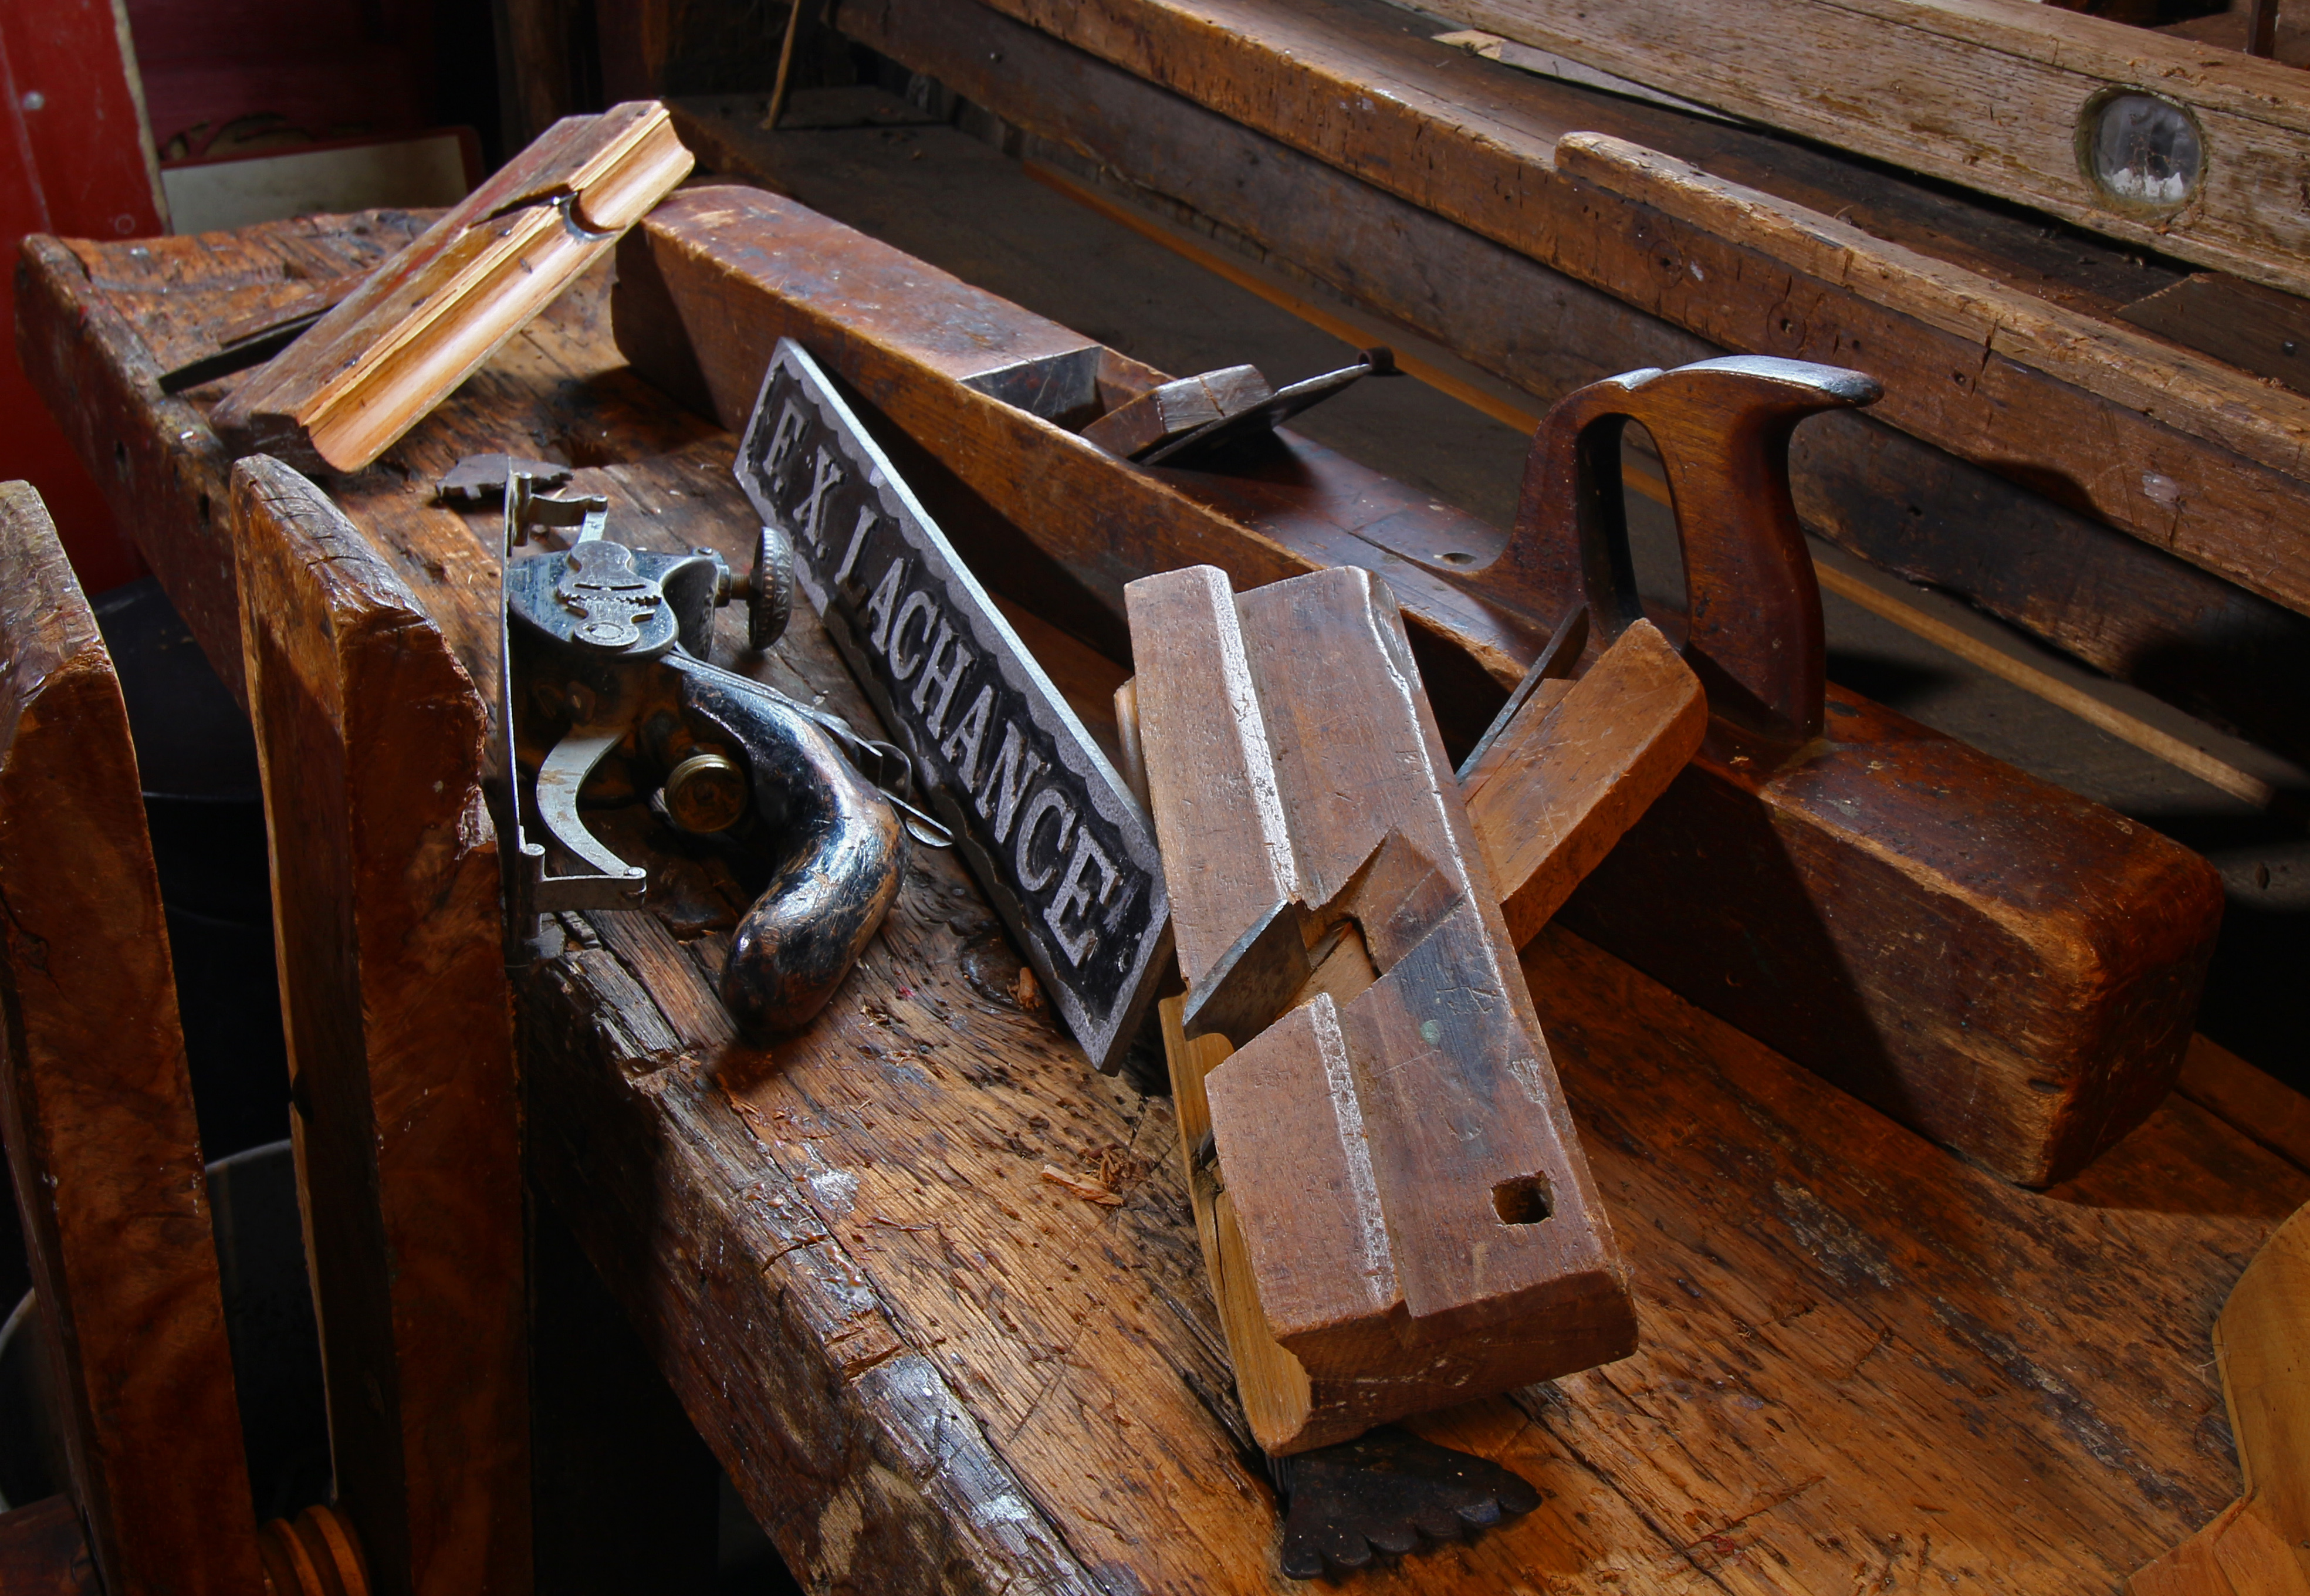 Current photography showing traditional carpentry tools, including a planer, a punch and a jig. The tools are placed on a workbench, next to a metal plate inscribed with "F.X. Lachance".